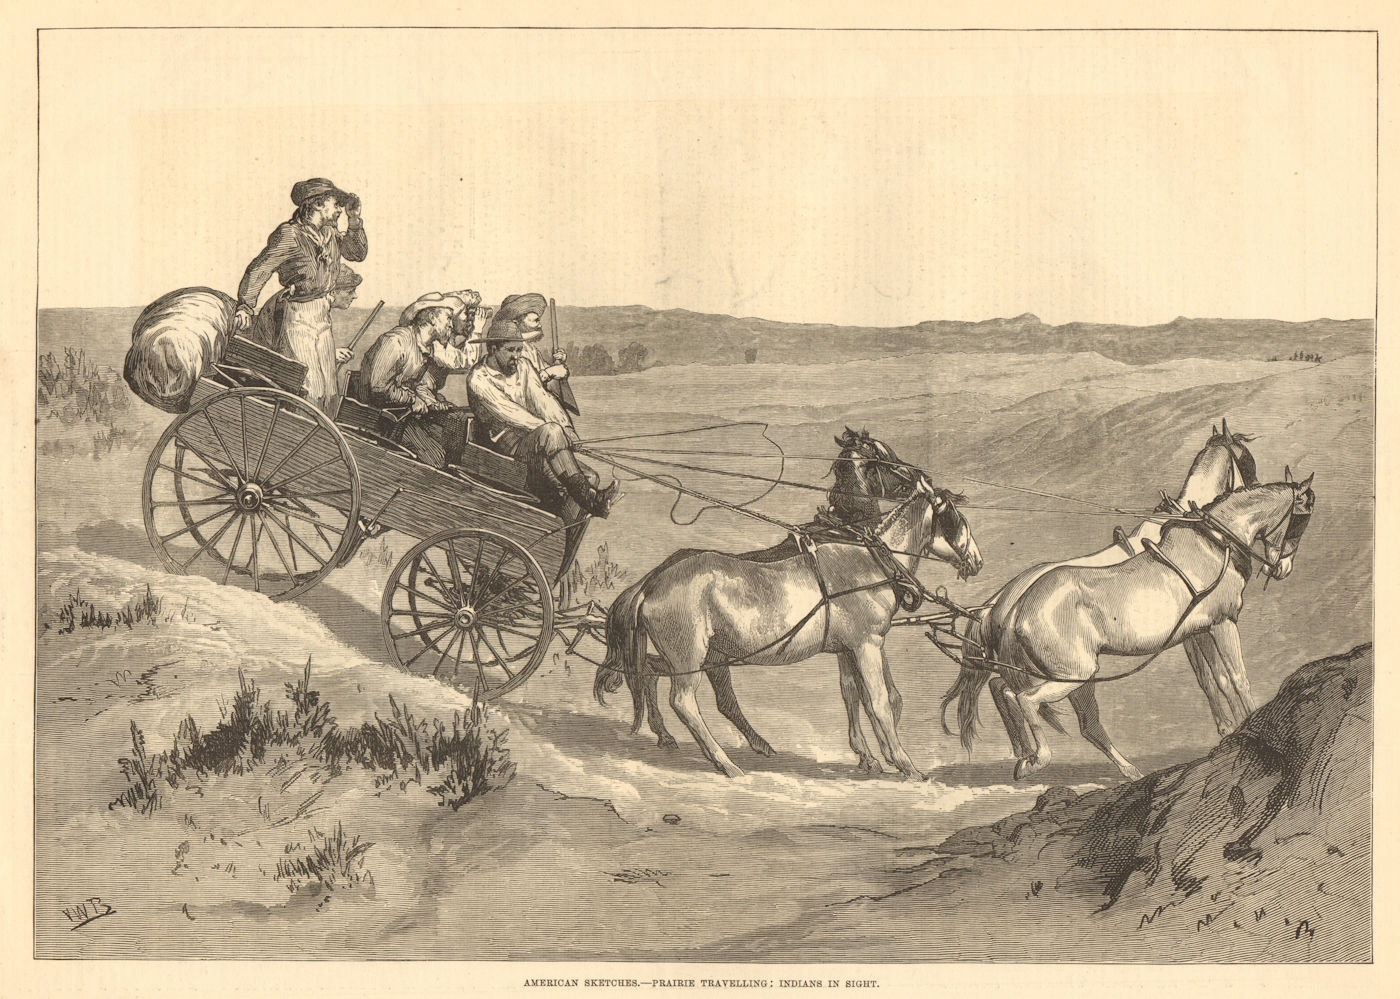 Associate Product Prairie traveling: Native American Indians in sight. Wagon horses 1877